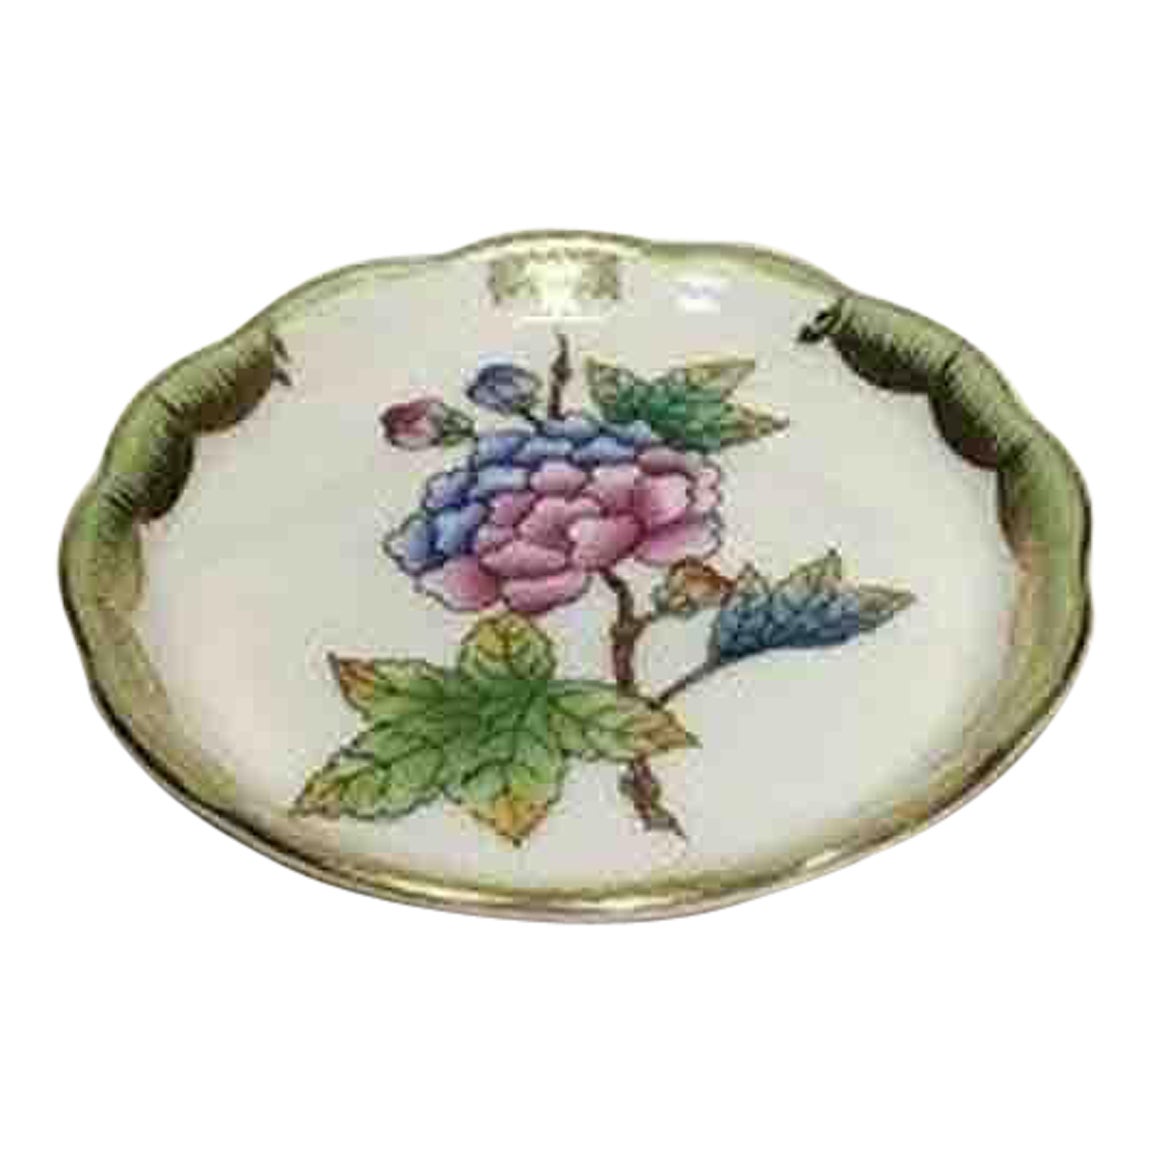 Herend Queen Victoria Green Round Dish 7562 / VBO For Sale